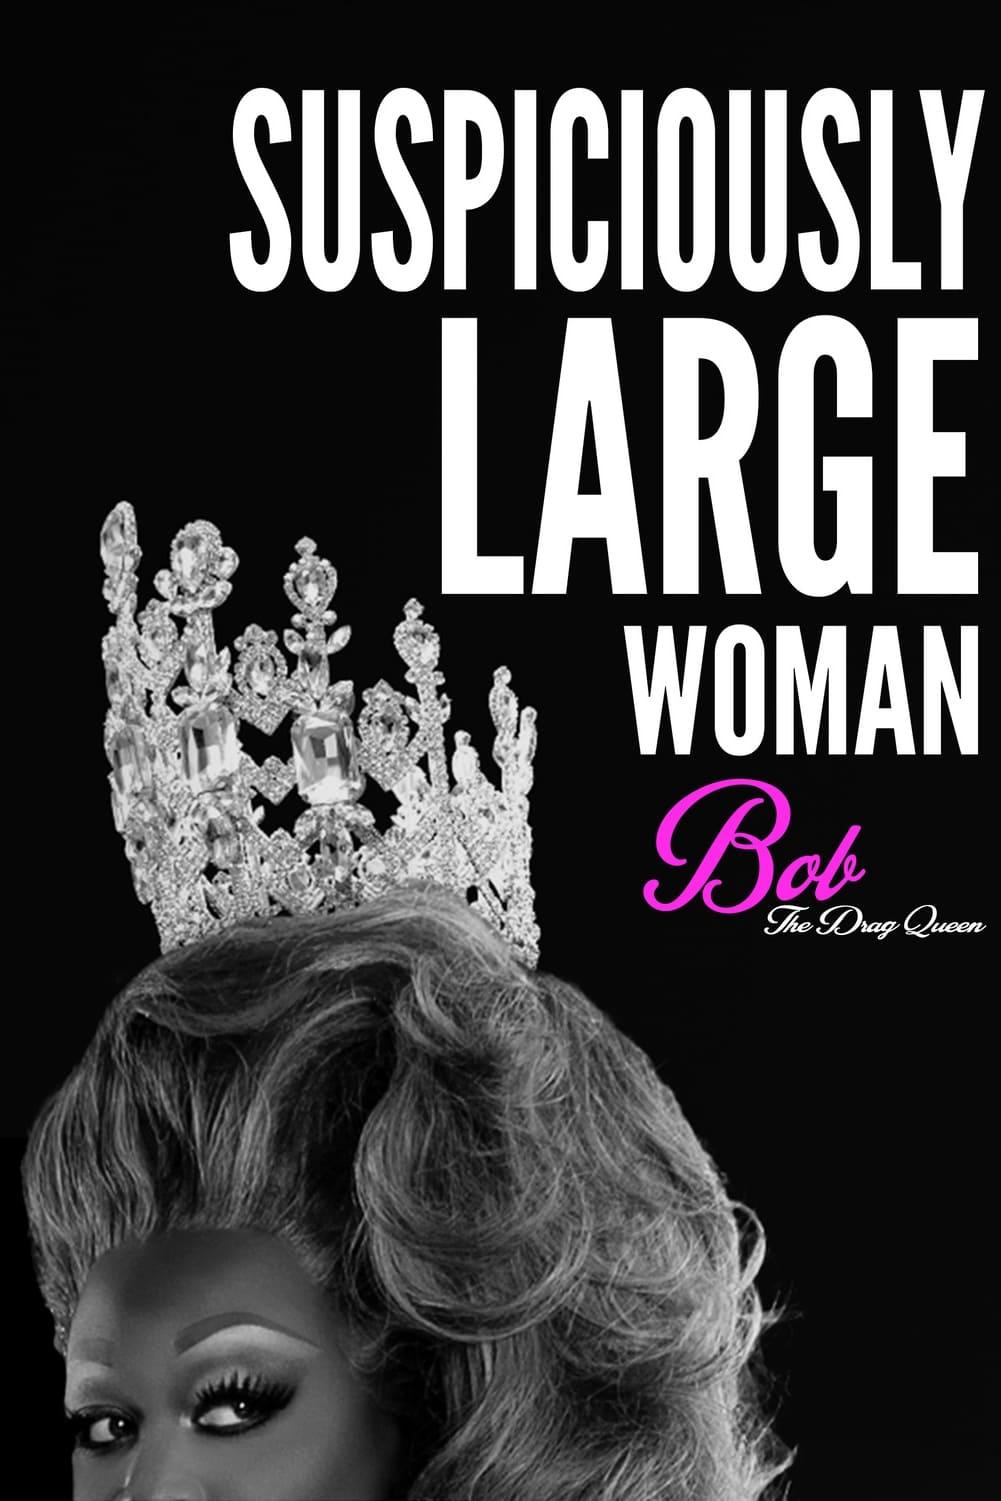 Bob the Drag Queen: Suspiciously Large Woman poster